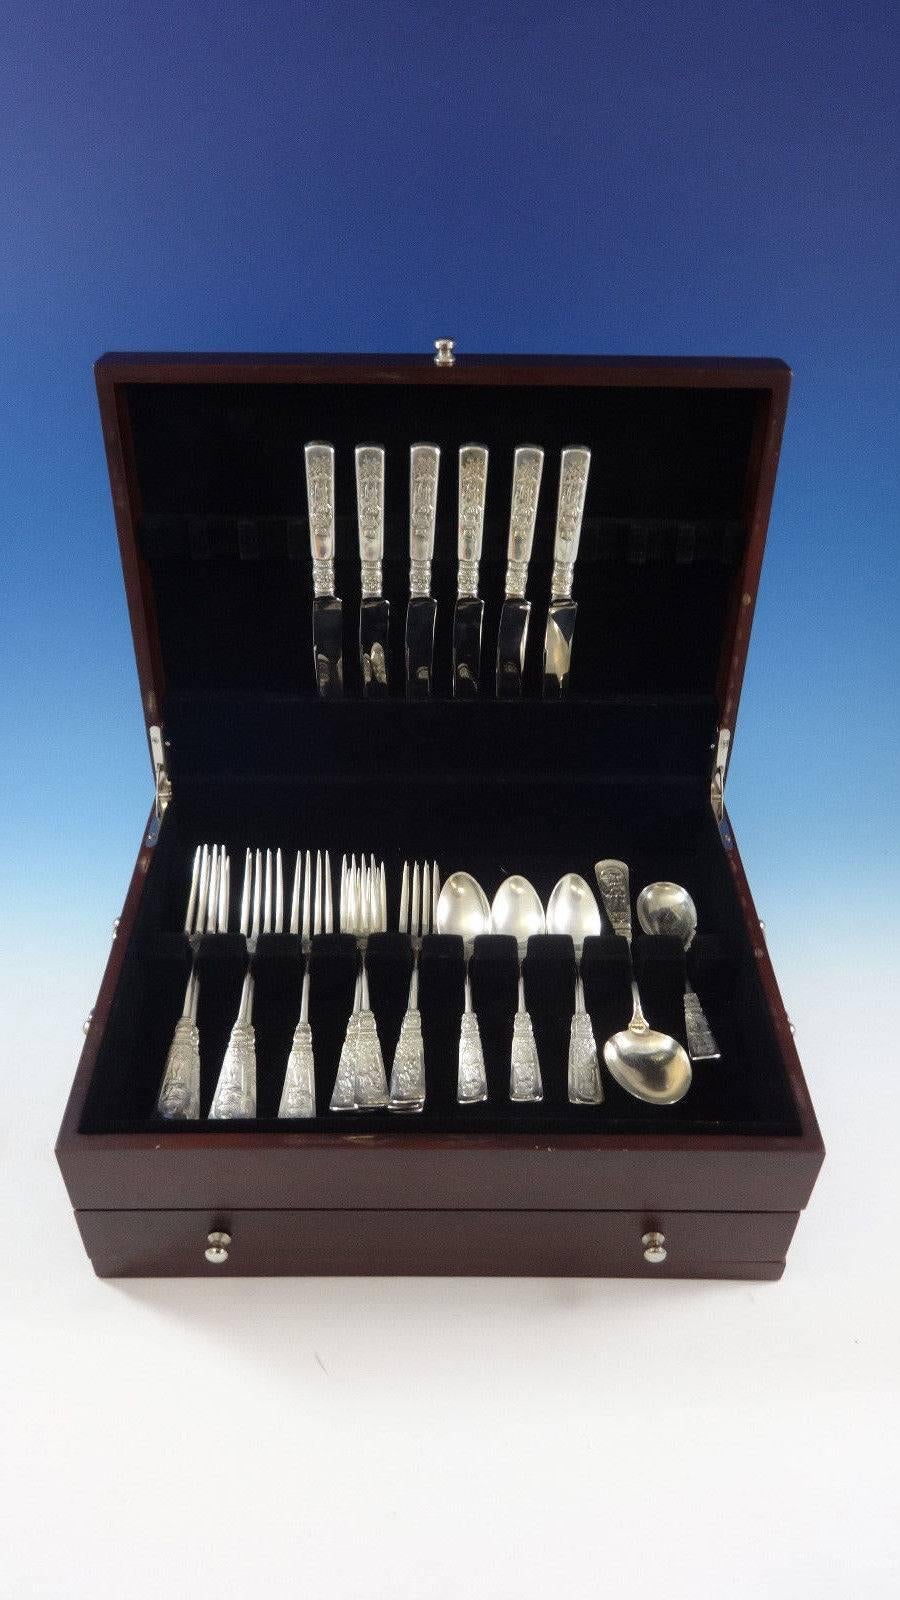 Fontainebleau by Gorham sterling silver flatware set of 26 pieces. Great starter set! This set includes: Six dinner forks, 7 5/8